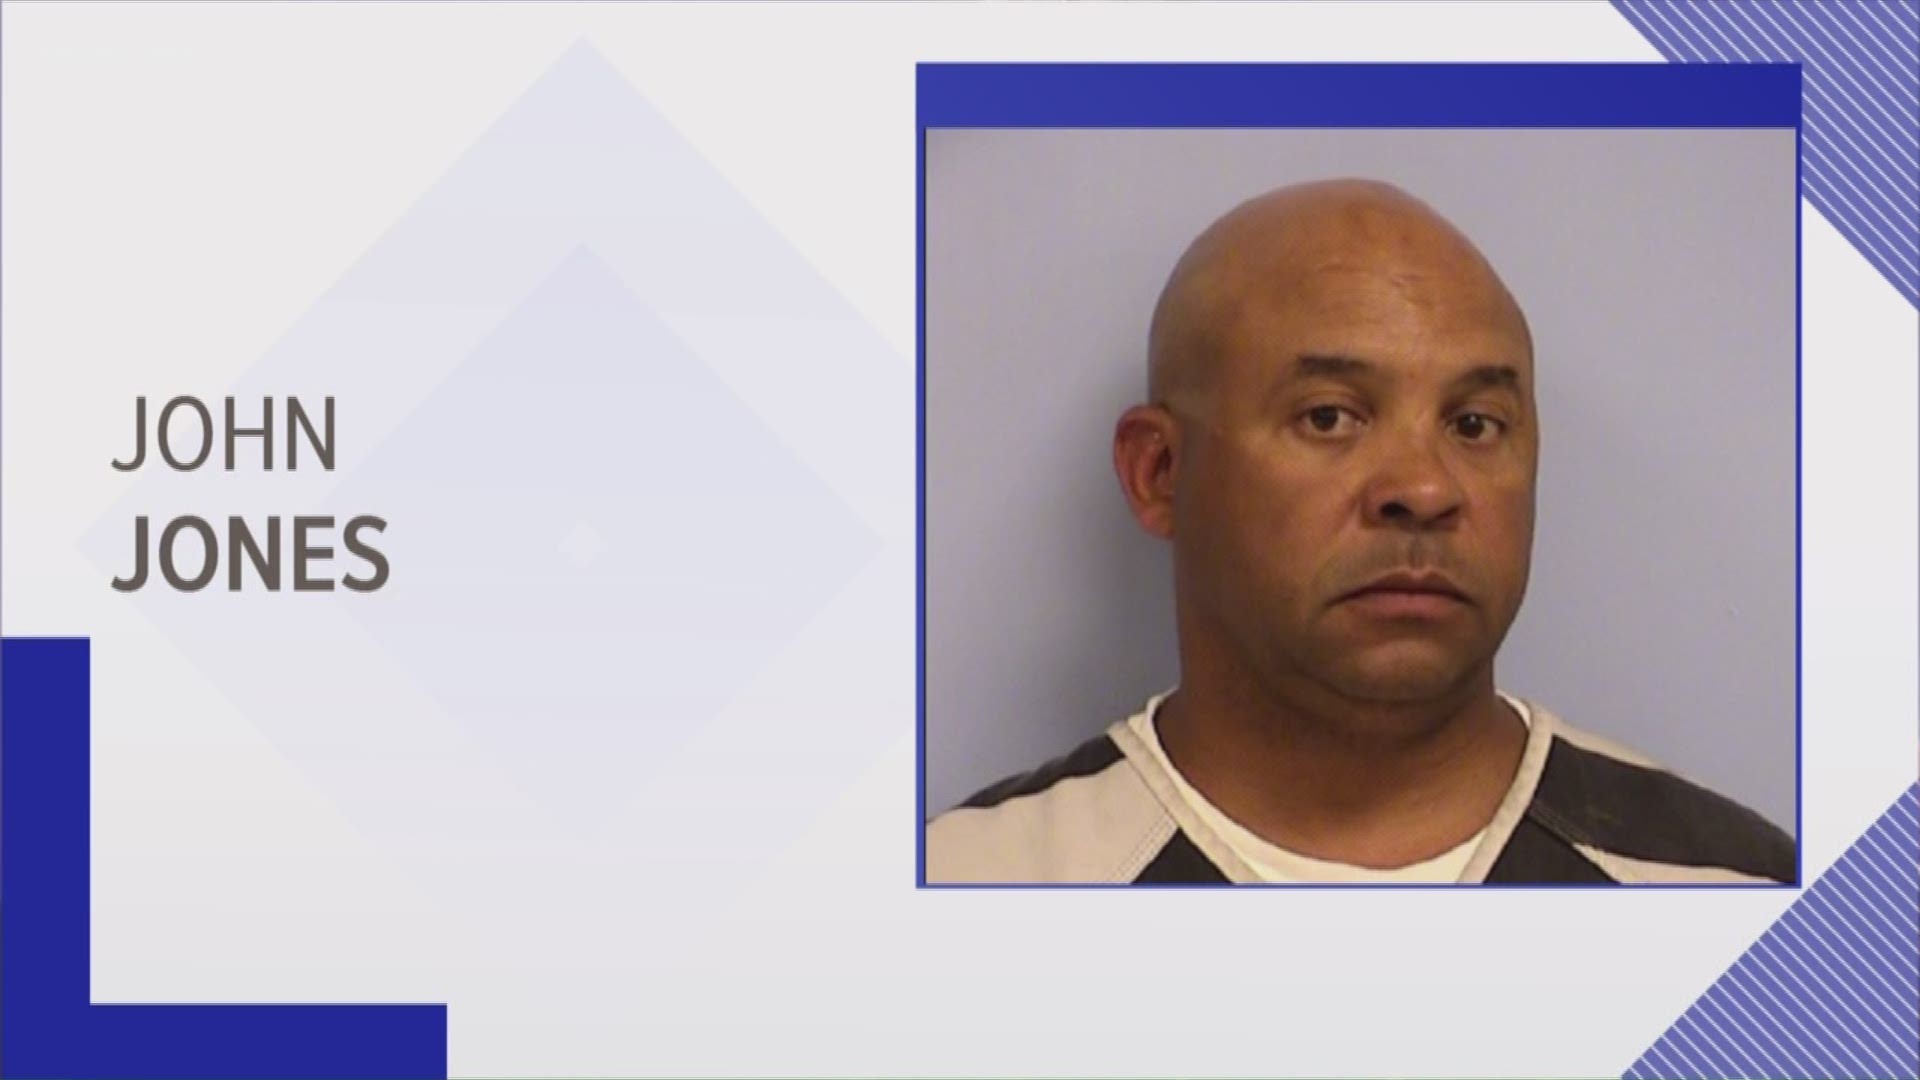 The former Texas DPS division chief accused of sexually assaulting a woman near his home is out of jail.